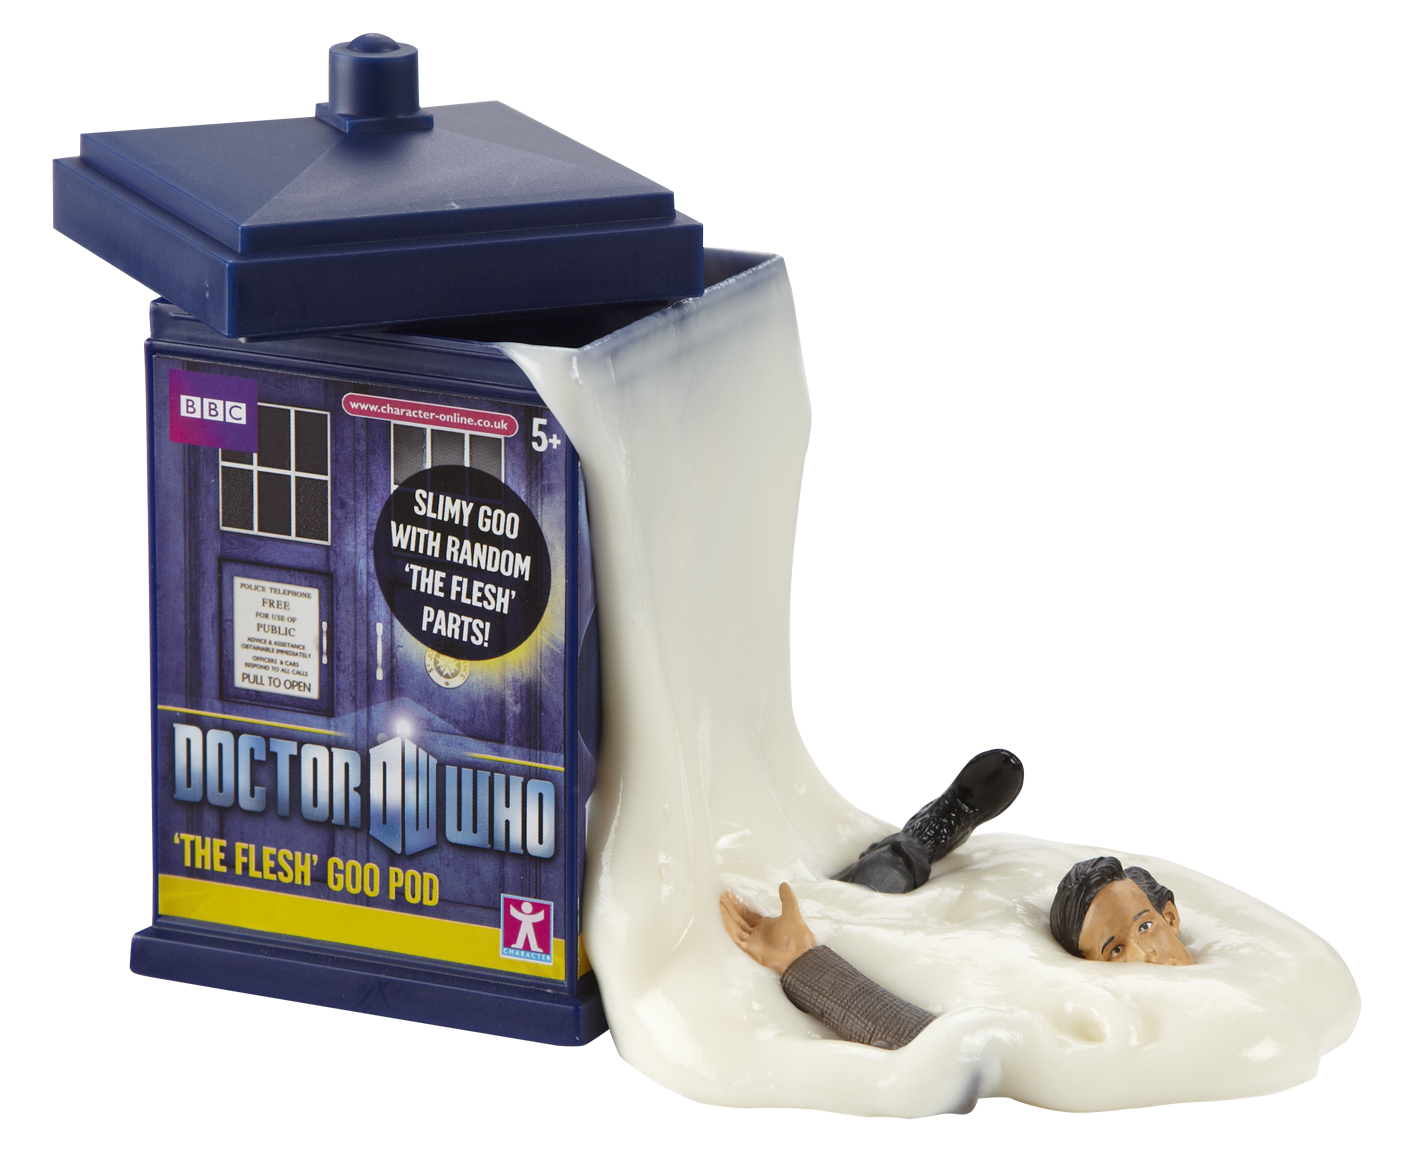 Dr Who - The Flesh Goo Pods